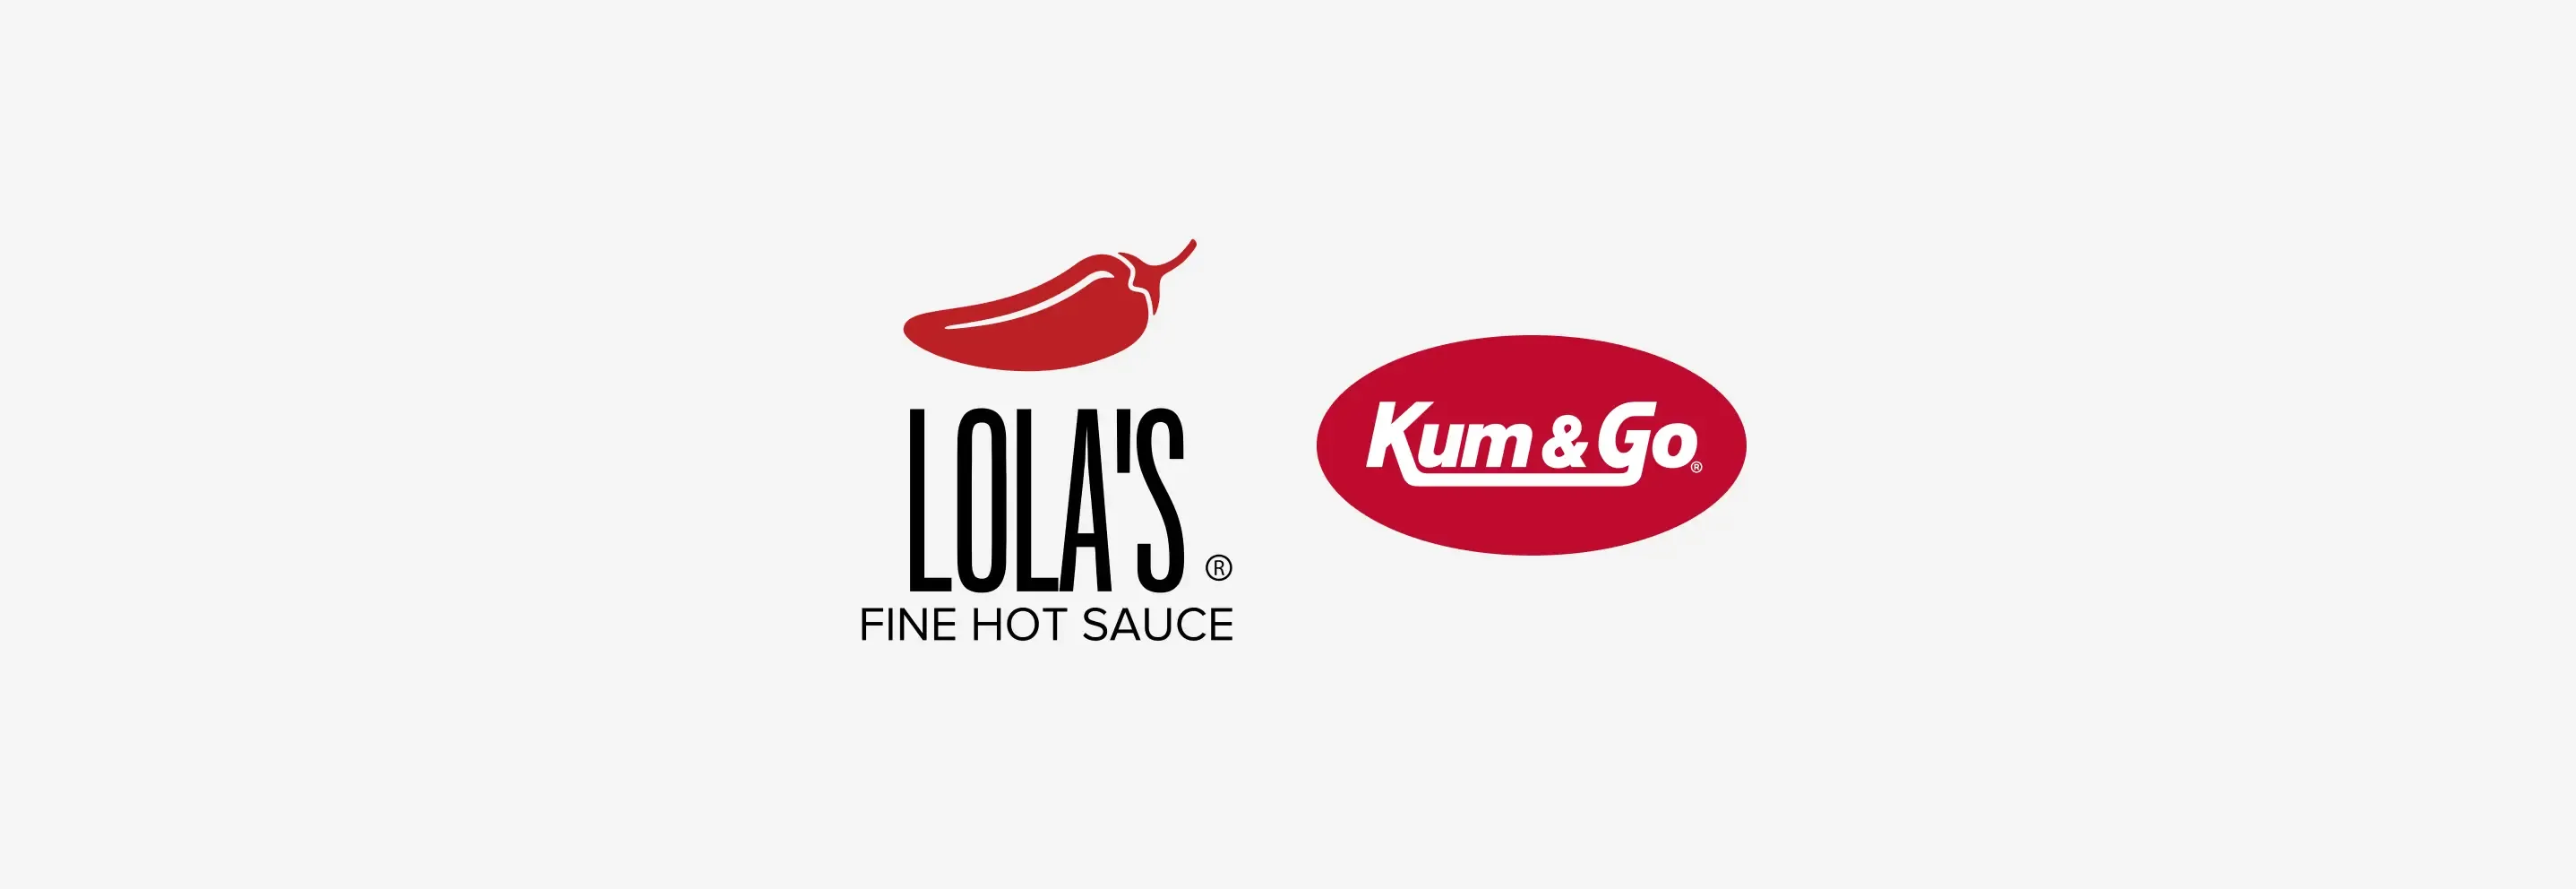 Kum & Go and Lola’s Hot Sauce brings a fresh perspective to convenience